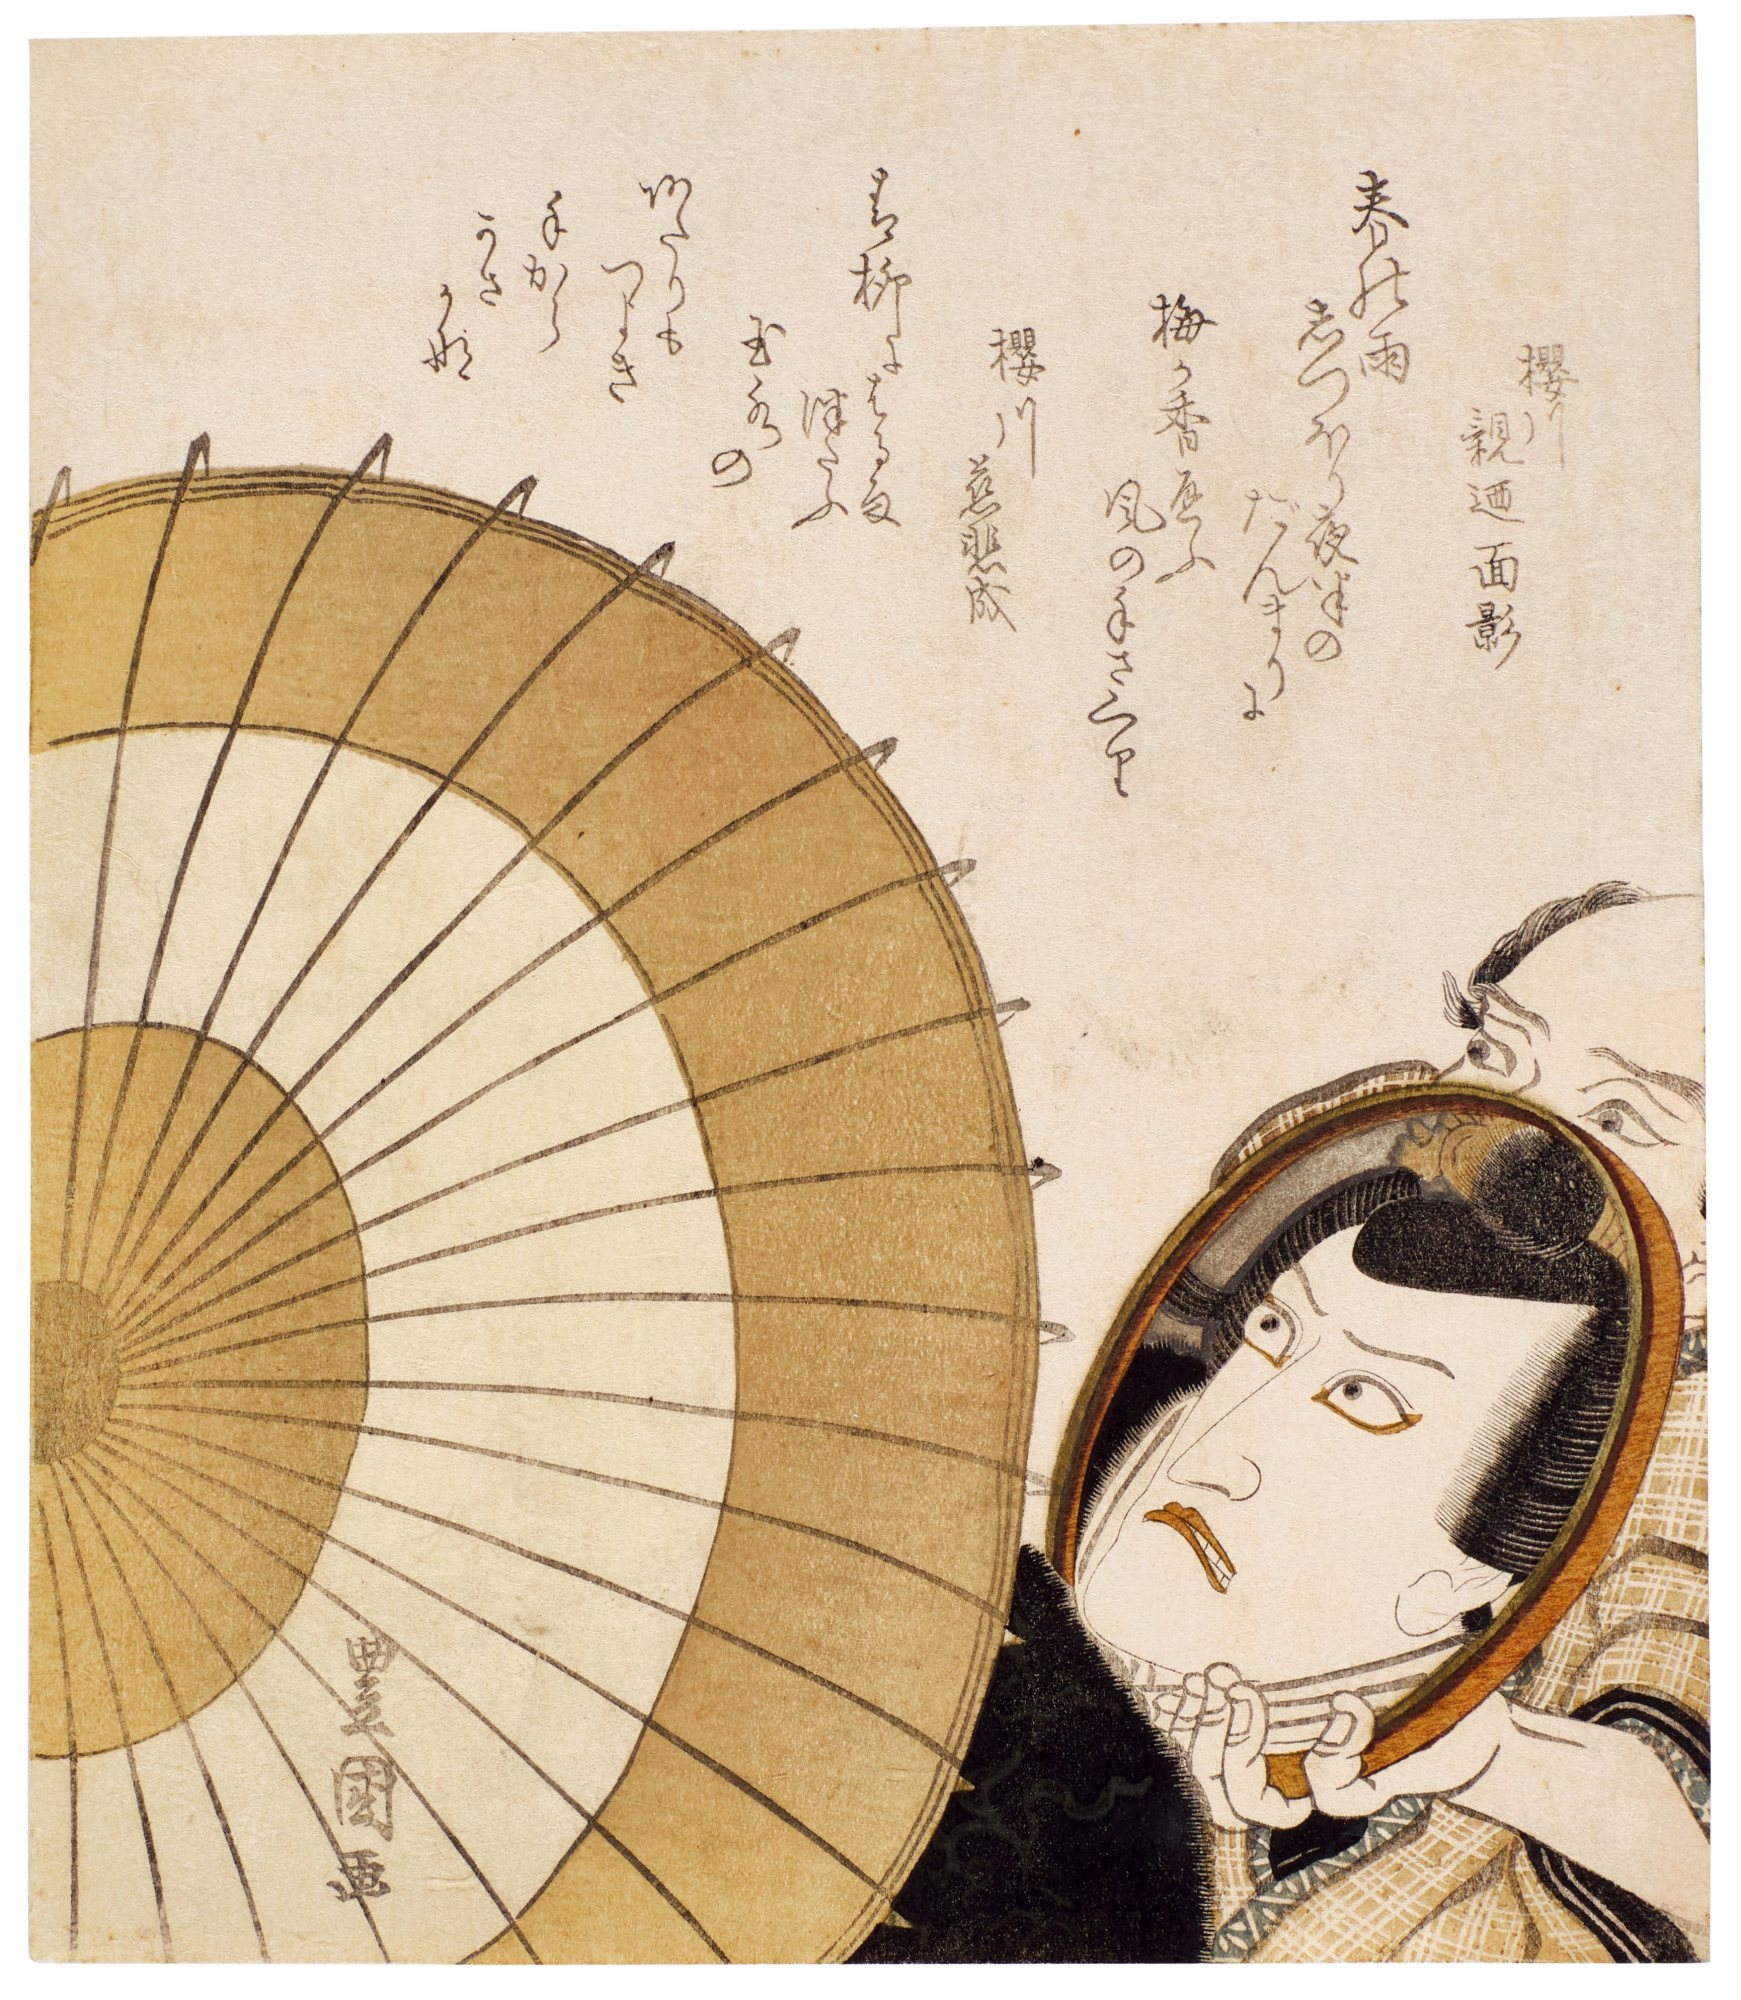 The face of the actor Ichikawa Ebizo VI reflected in a mirror from behind a parasol by Utagawa Toyokuni, circa 1820s